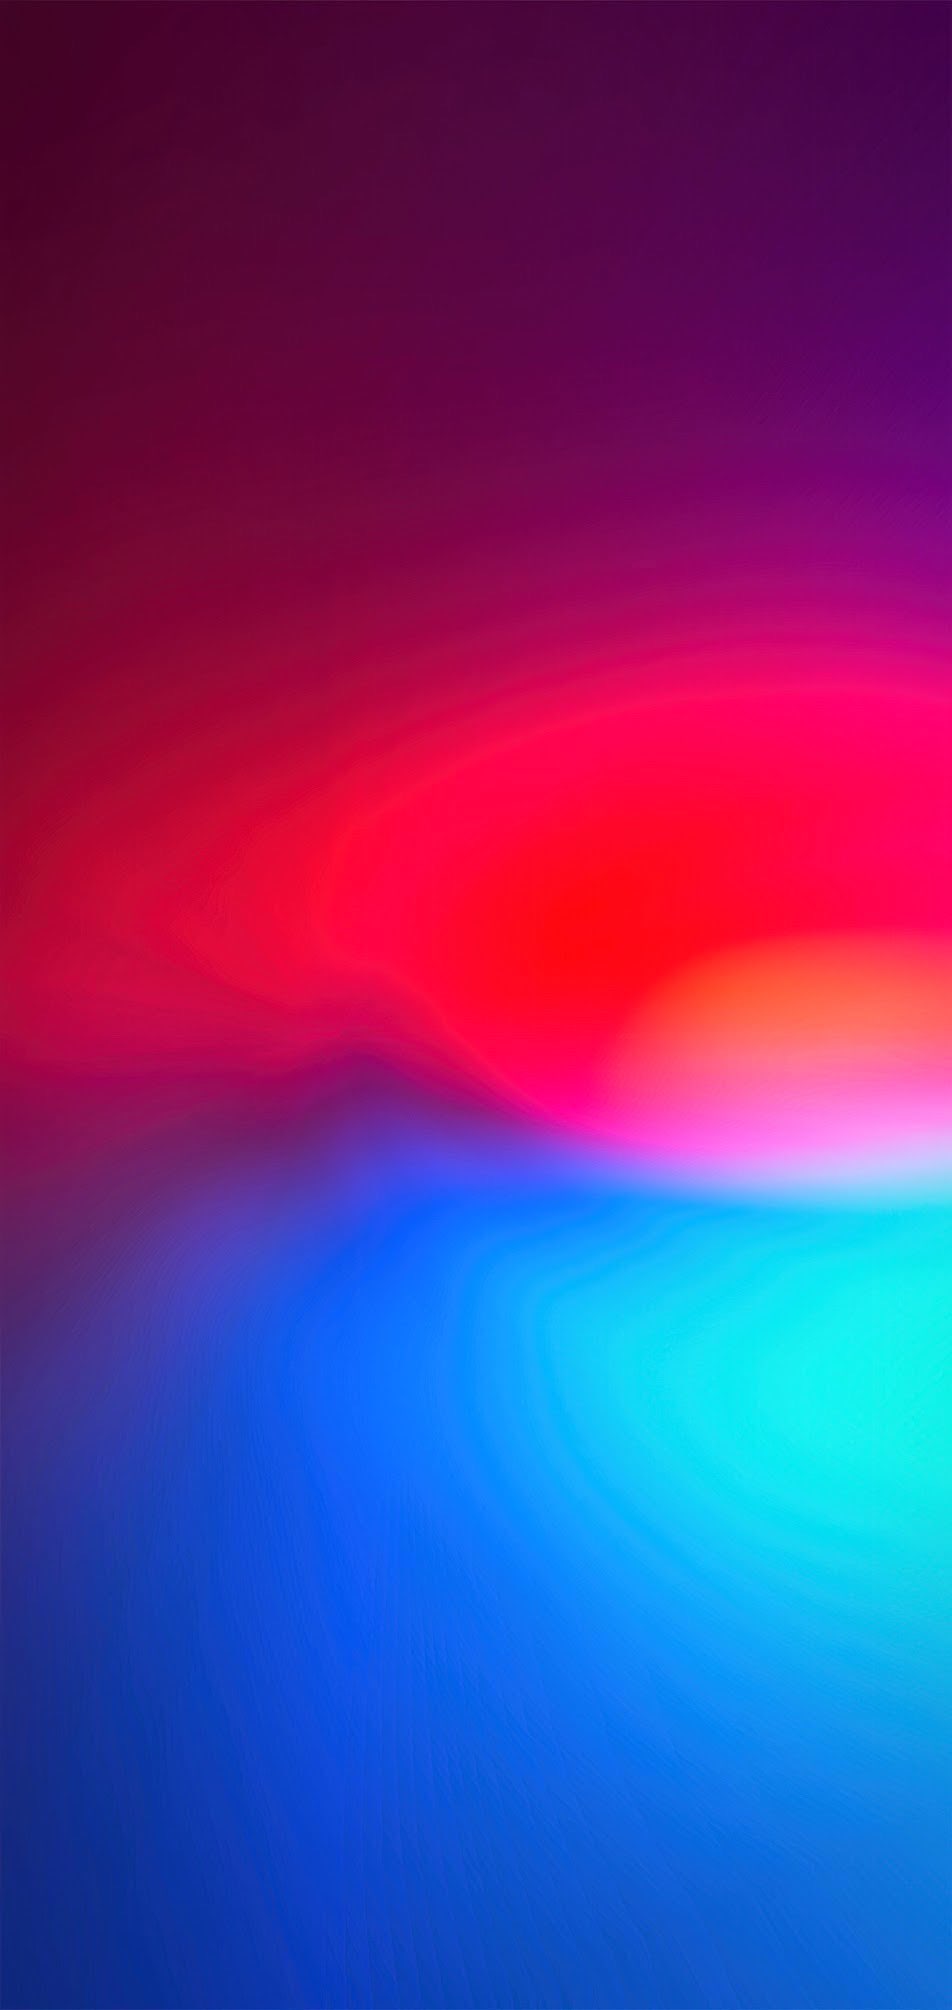 Red Blue Waves Gradient wallpaper for Apple iPhone, Mac, iPad and more